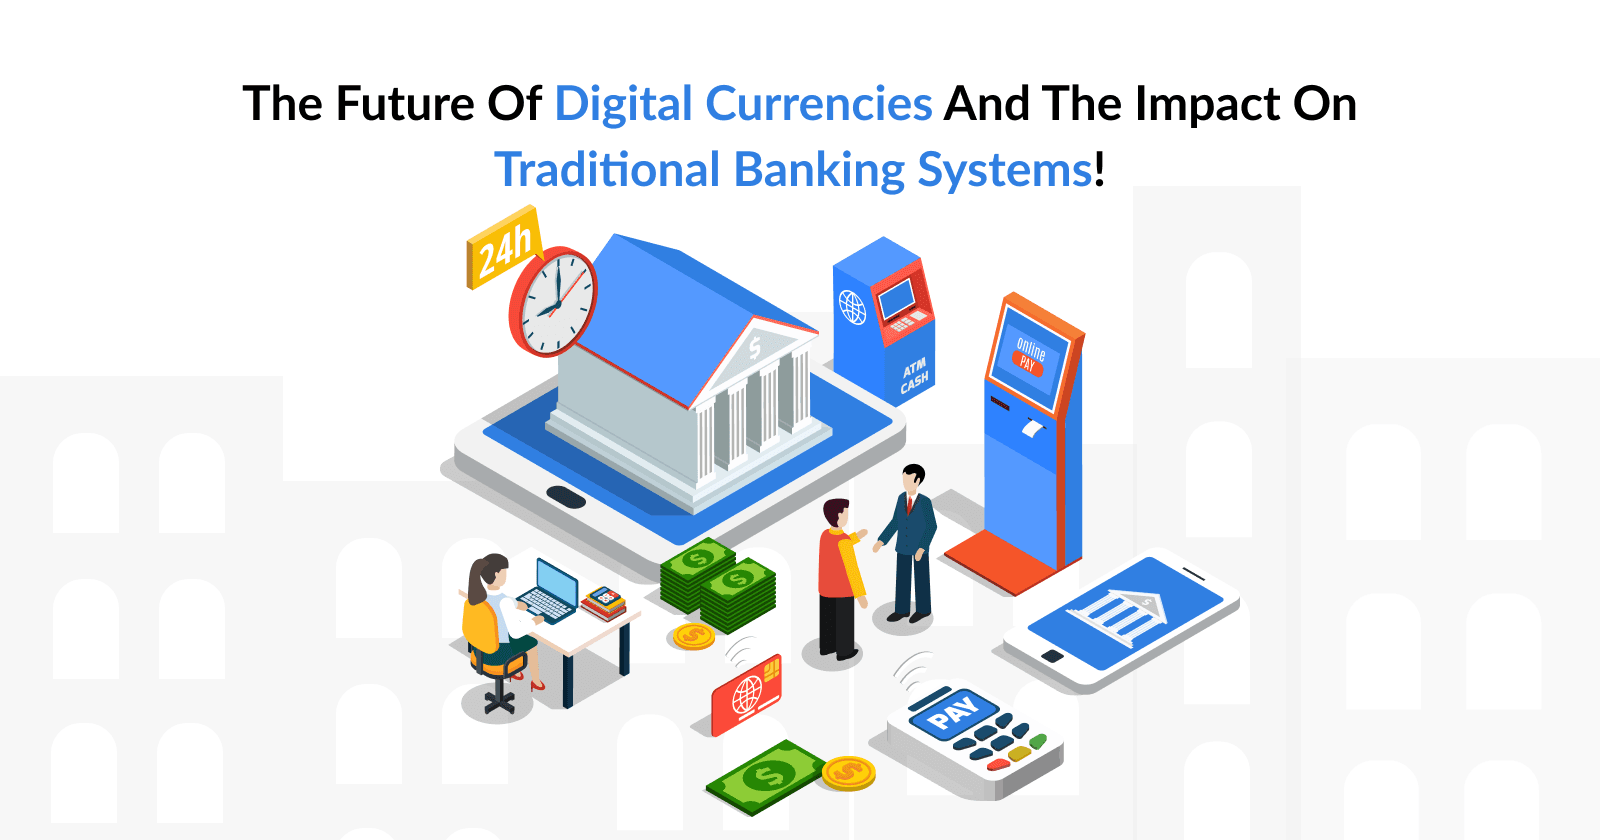 The Future of Digital Currencies and the Impact on Traditional Banking Systems!